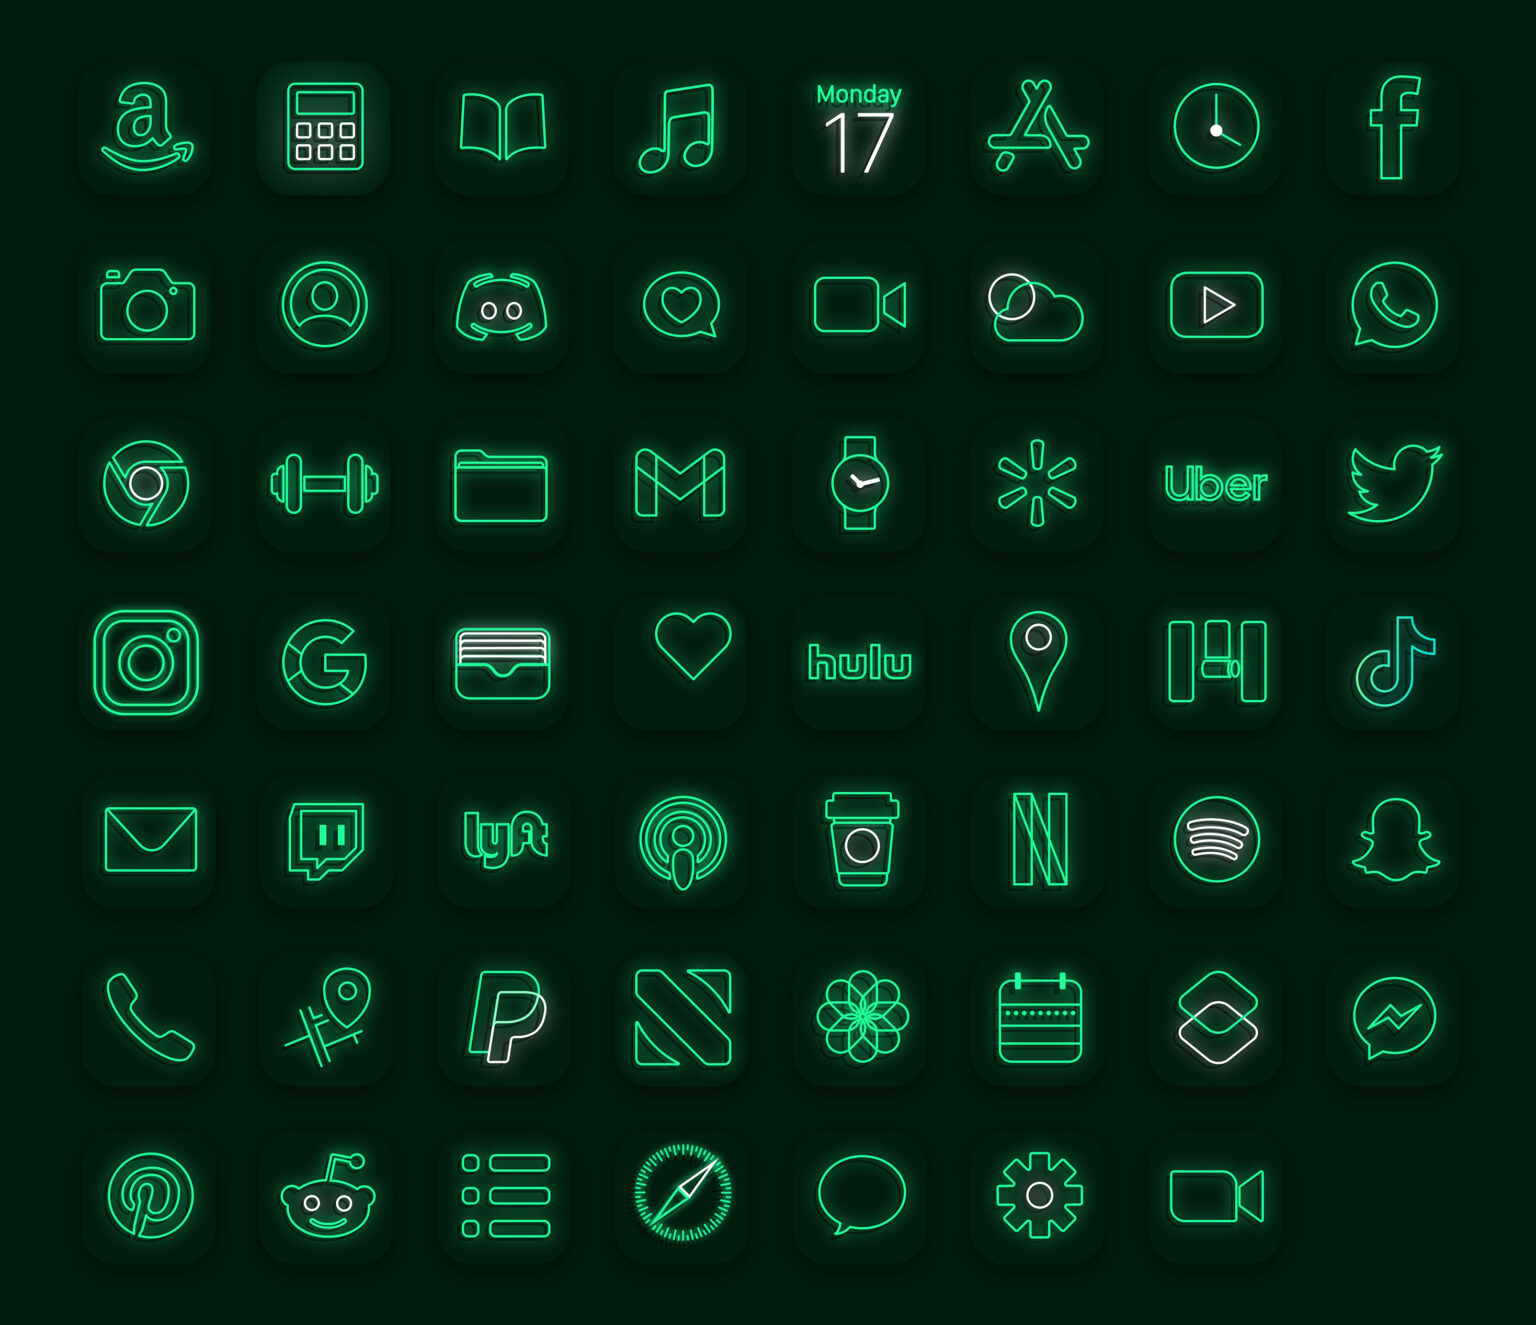 Neon Green App Icons FREE - Aesthetic Green App Icons iOS & Android